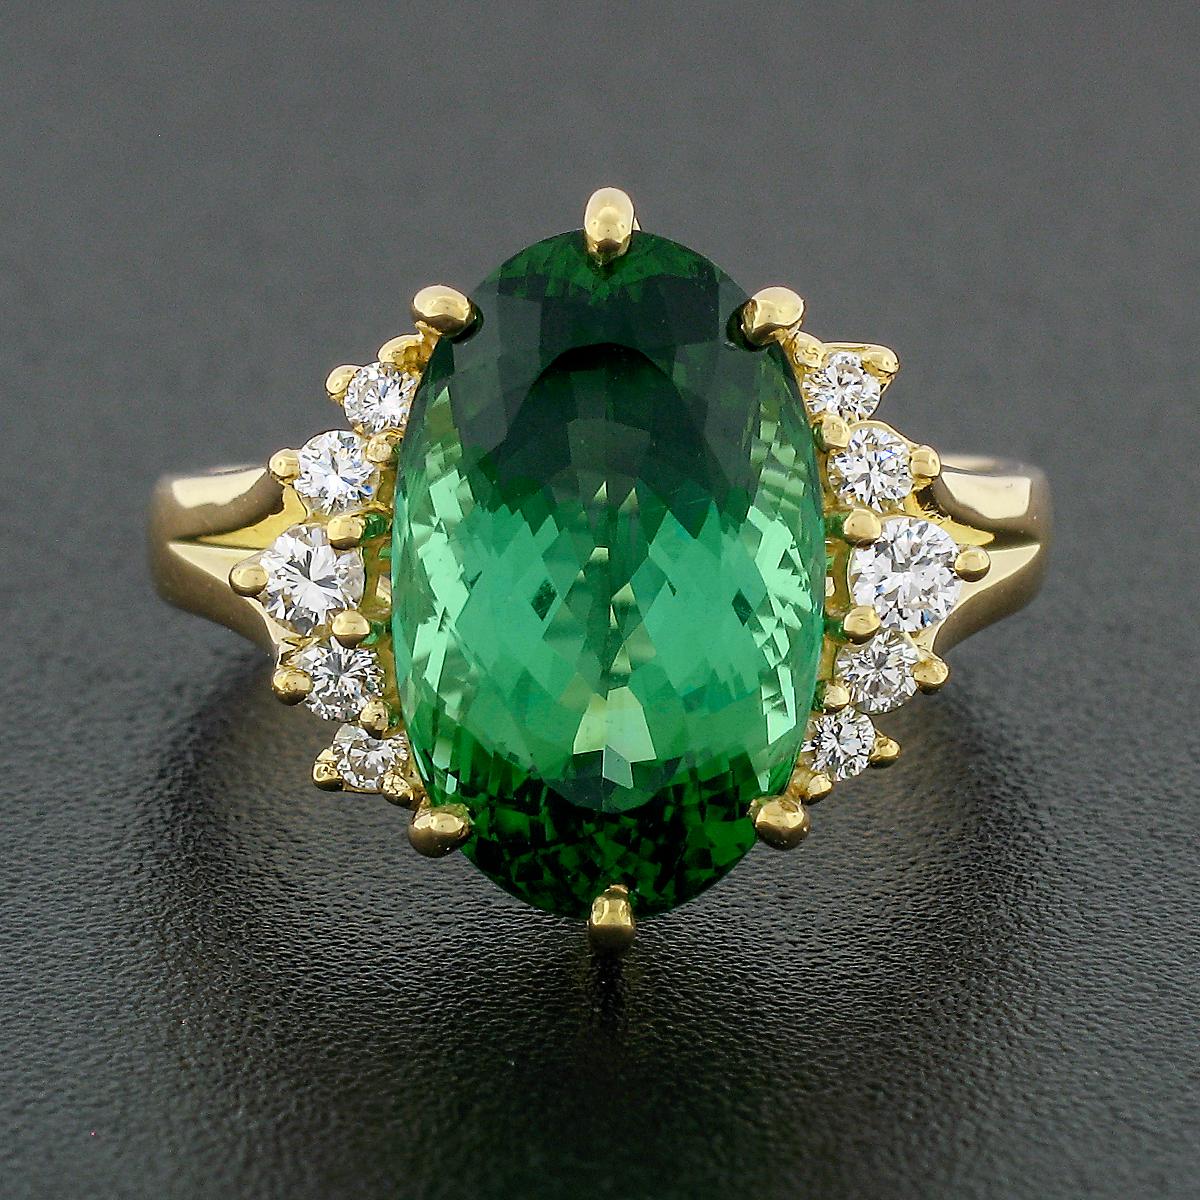 This stunning, vintage, H.Stern ring is crafted in solid 18k yellow gold and features a very fine and HIGH QUALITY tourmaline stone neatly set at center with round brilliant diamond accents at the sides. The large tourmaline displays the most